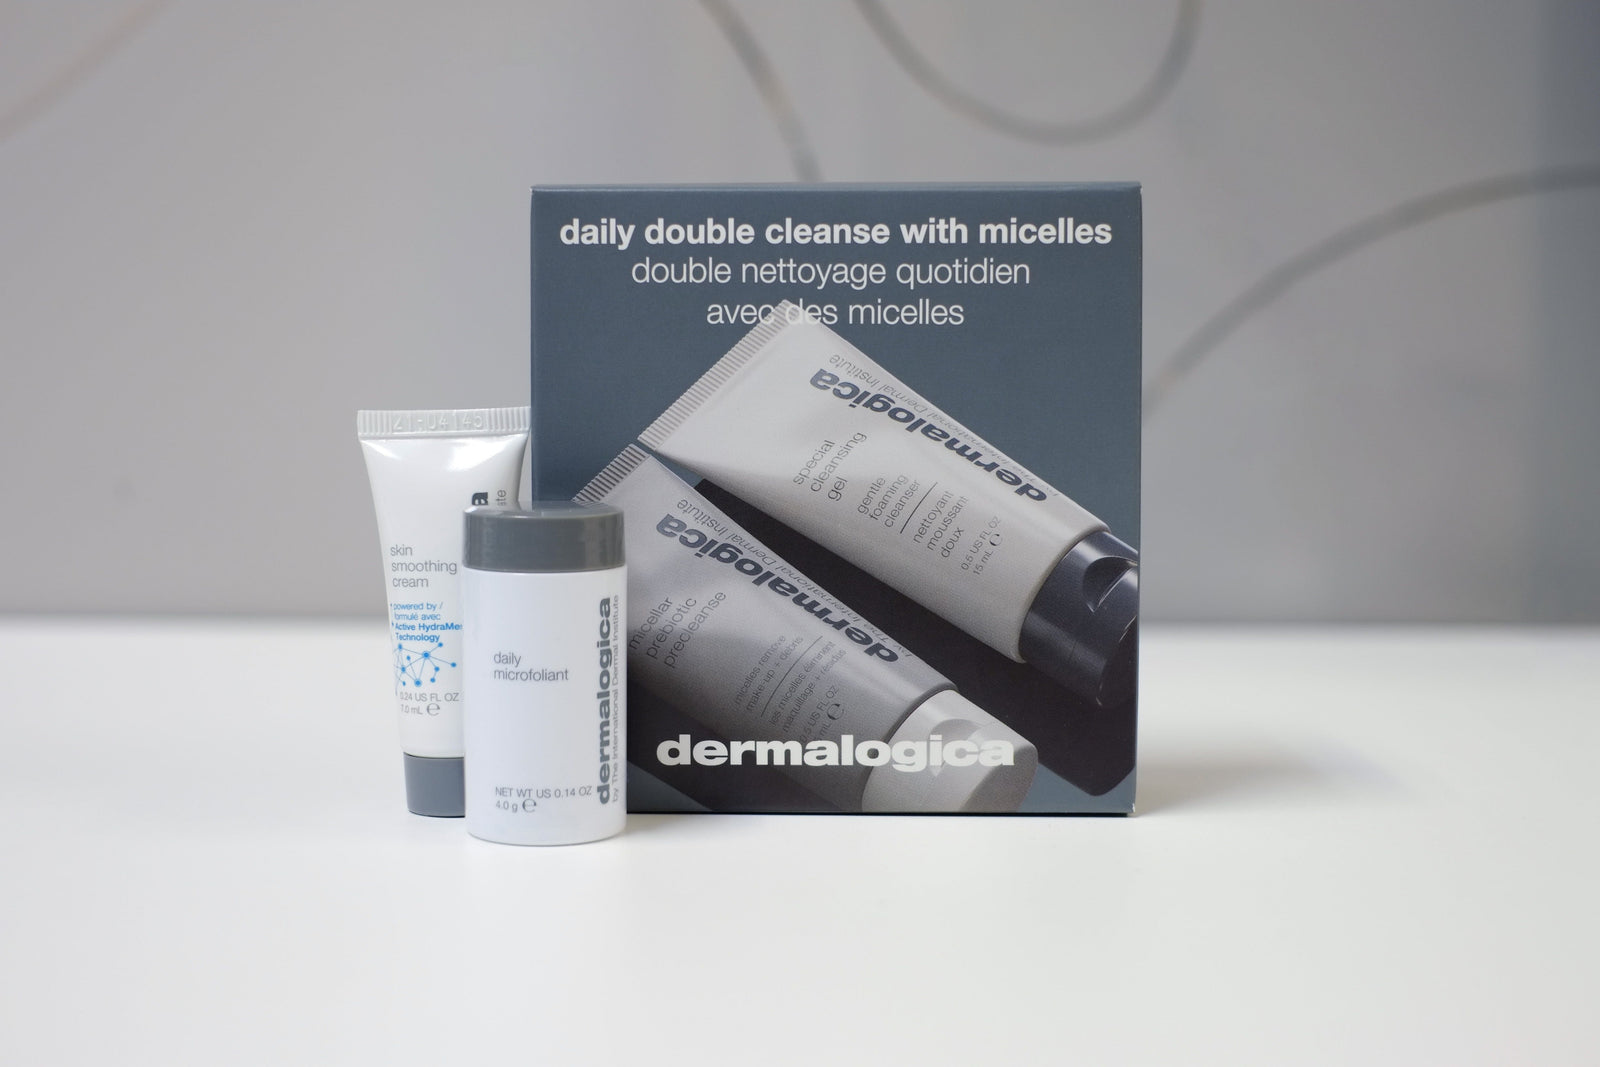 Dermalogica: Tier 1 Free Gift with Purchase